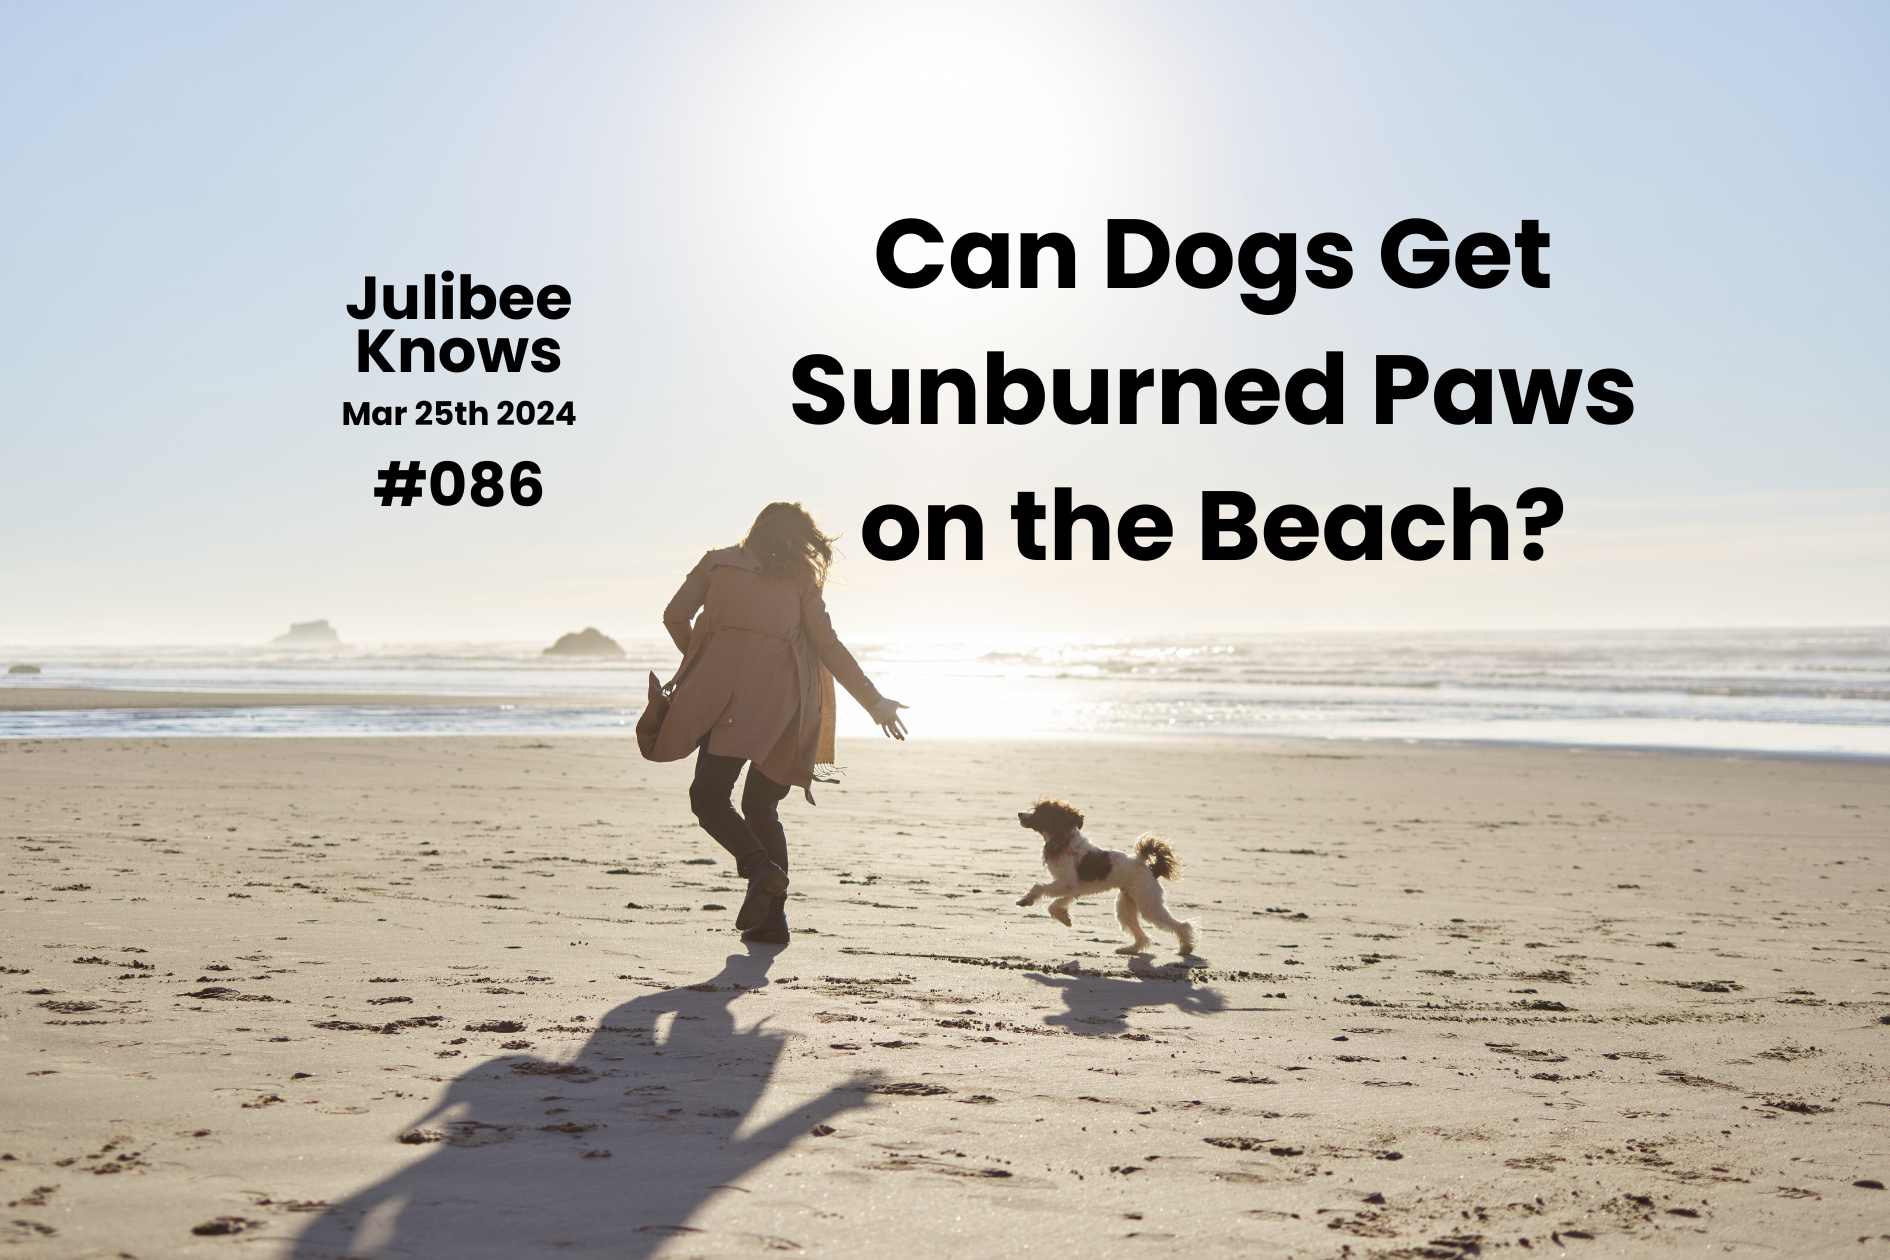 Can Dogs Get Sunburned Paws on the Beach